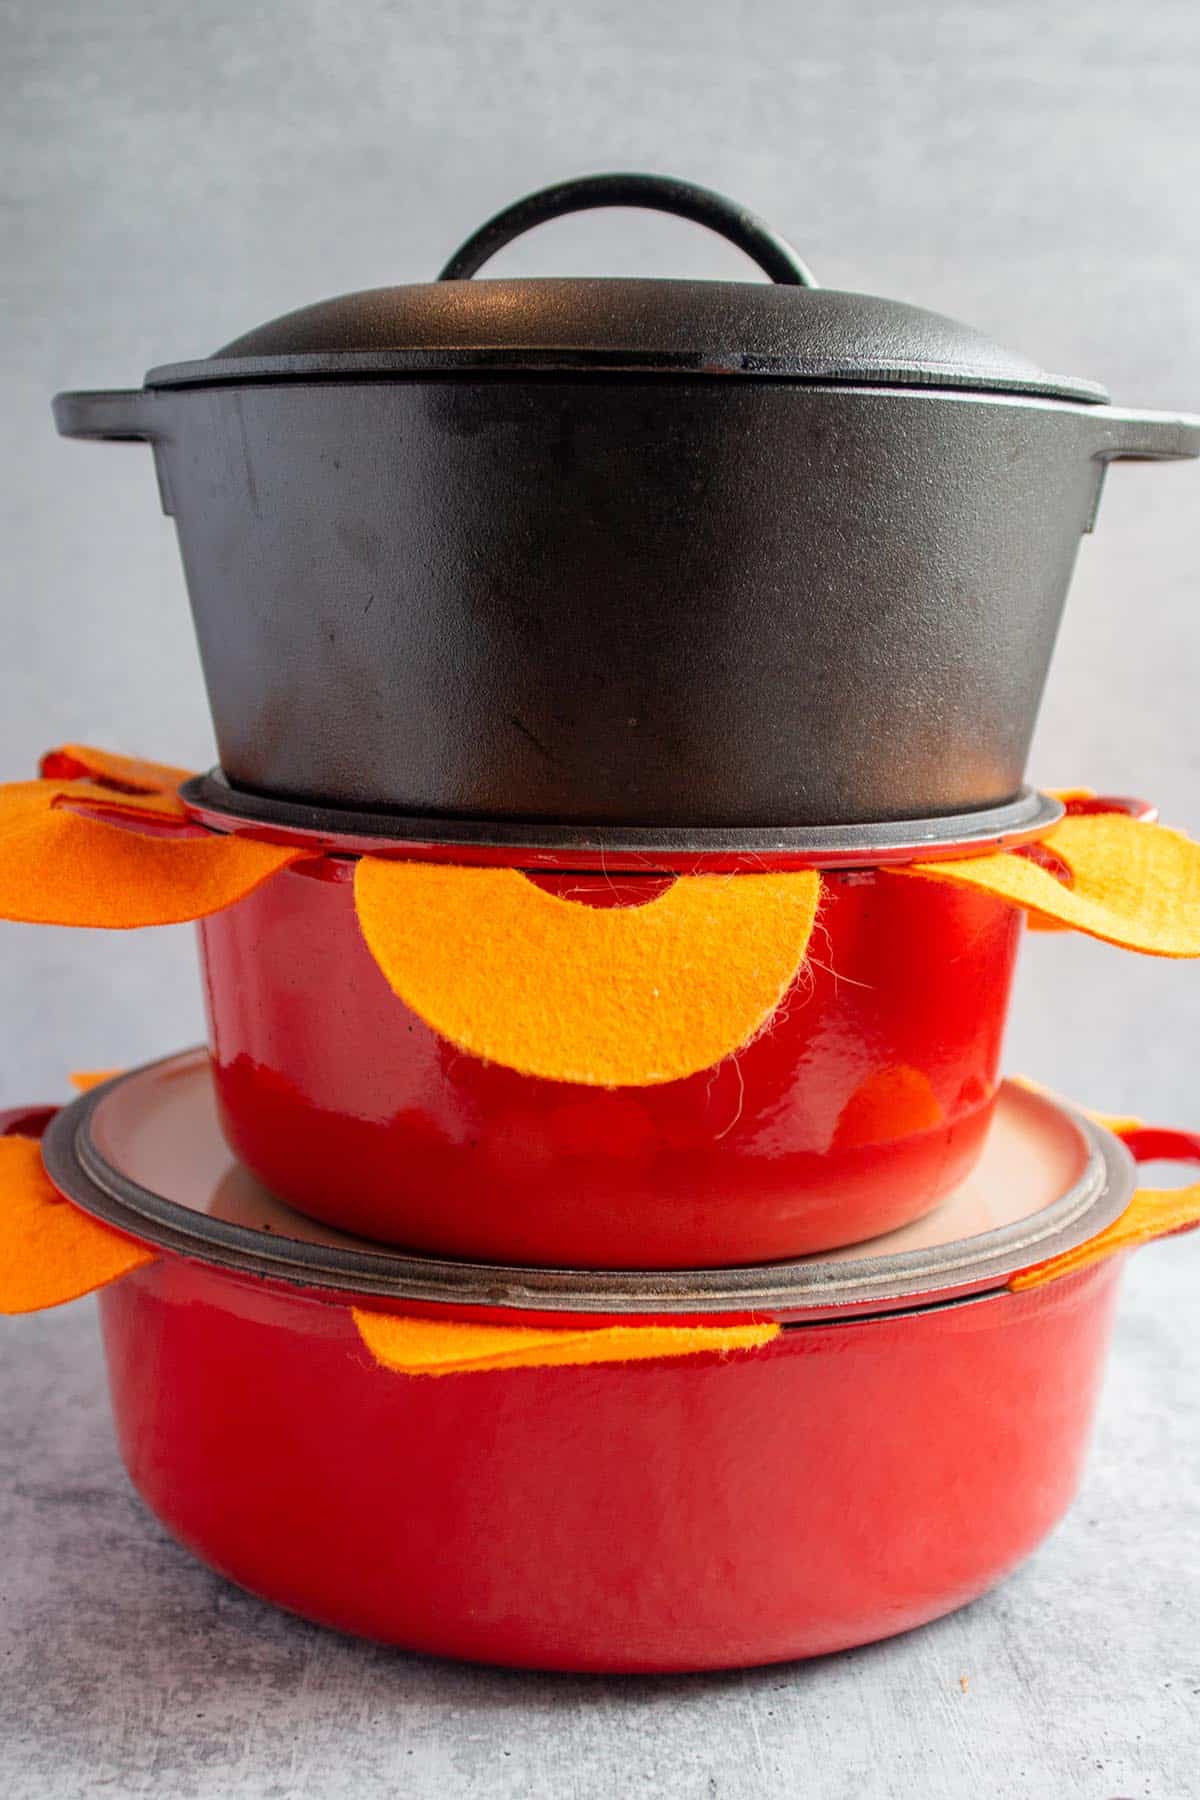 A stack of dutch ovens. Two red Le Creuset and one Lodge Cast iron. Felt separators in-between each one.  